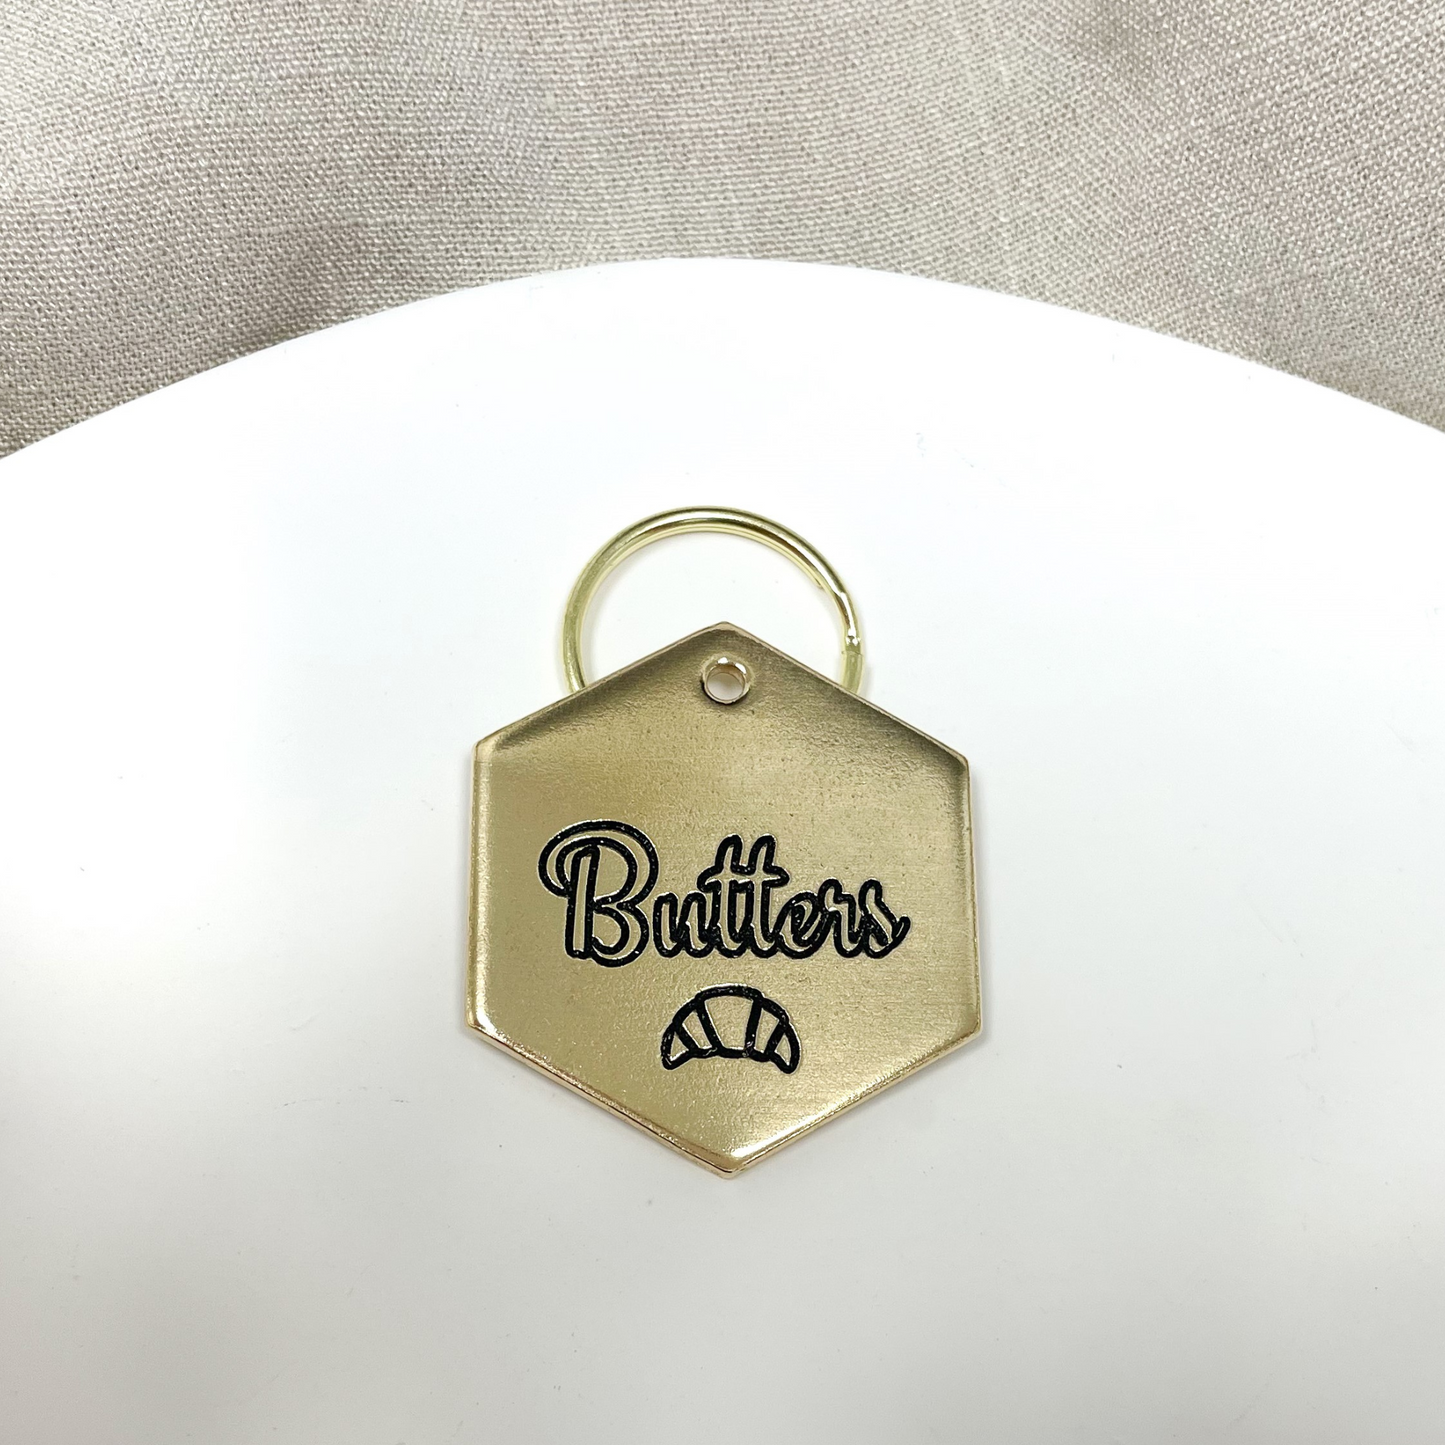 Personalized Dog Tag - Croissant Design Engraved Dog Tag - Cat ID Tag - Dog Collar Tag - Custom Dog Tag - Personalized Tag - Pet ID Tag - Pet Name Tag - Dog Gear - Croissant Dog Tag - Dog Accessories - Pet Accessories - Baking Themed